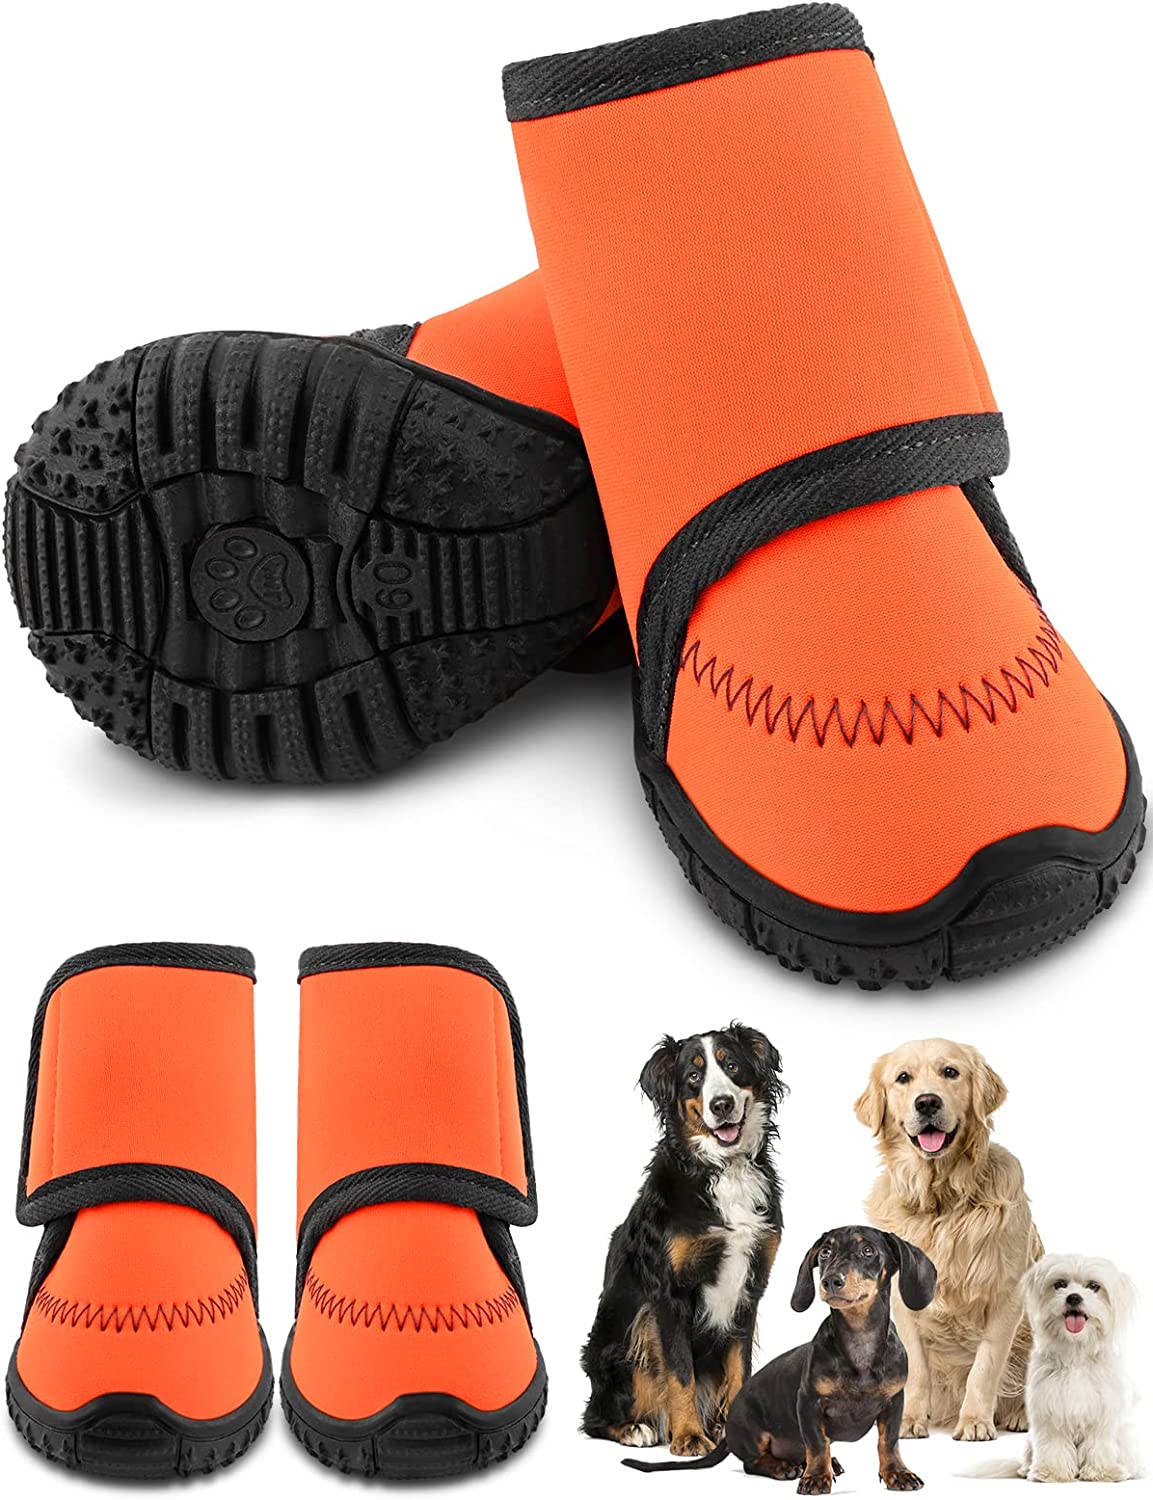 Petbobi Breathable Stretch Fabric Dog Boots